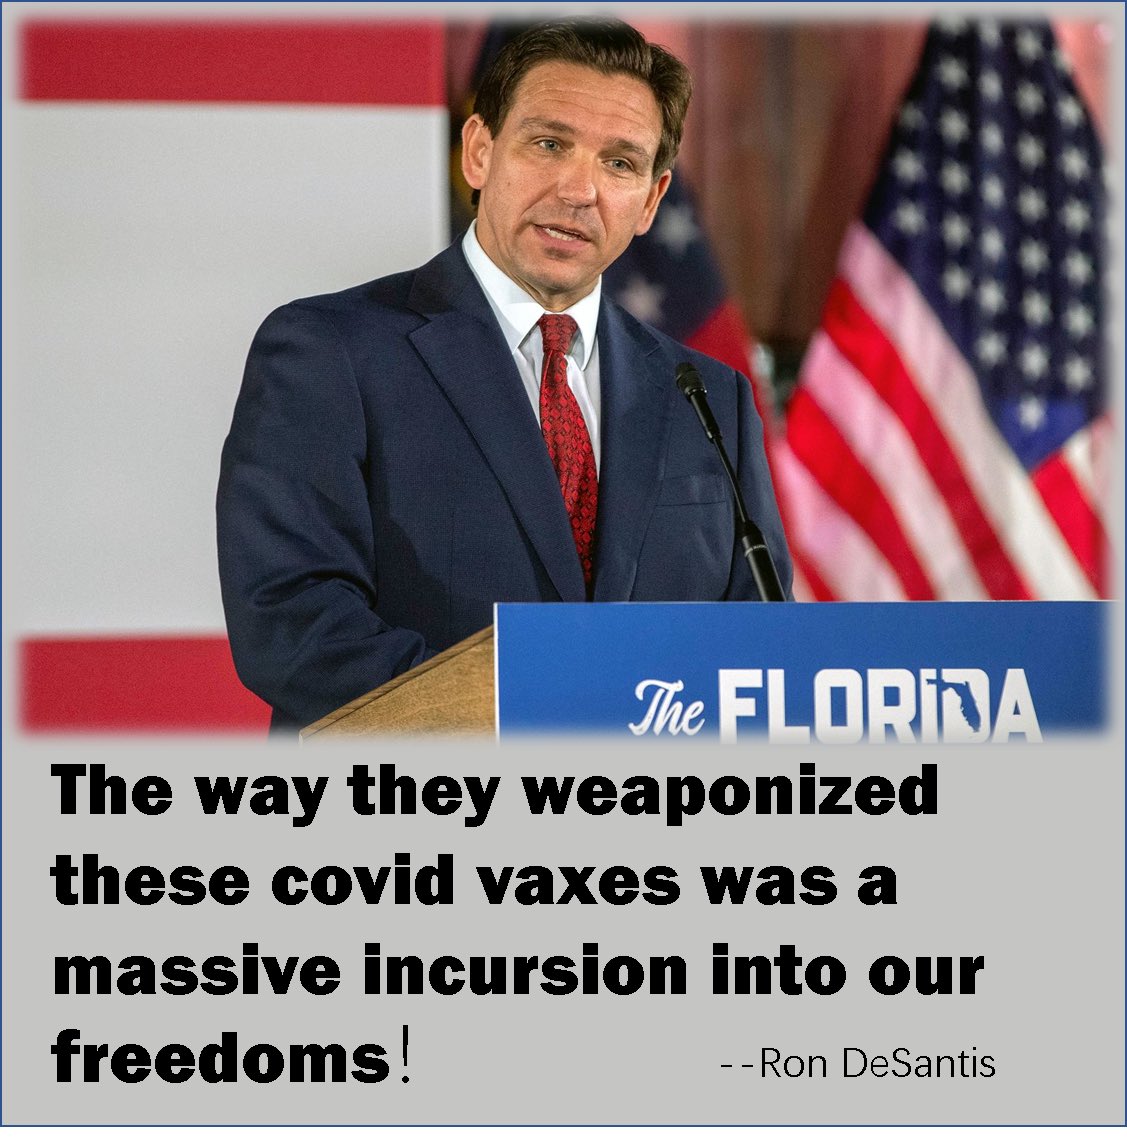 The way they weaponized these covid vaxes was a massive incursion into our freedoms! ——Ron DeSantis
#CCPliedpeopledied 
#WuHanP4LAB